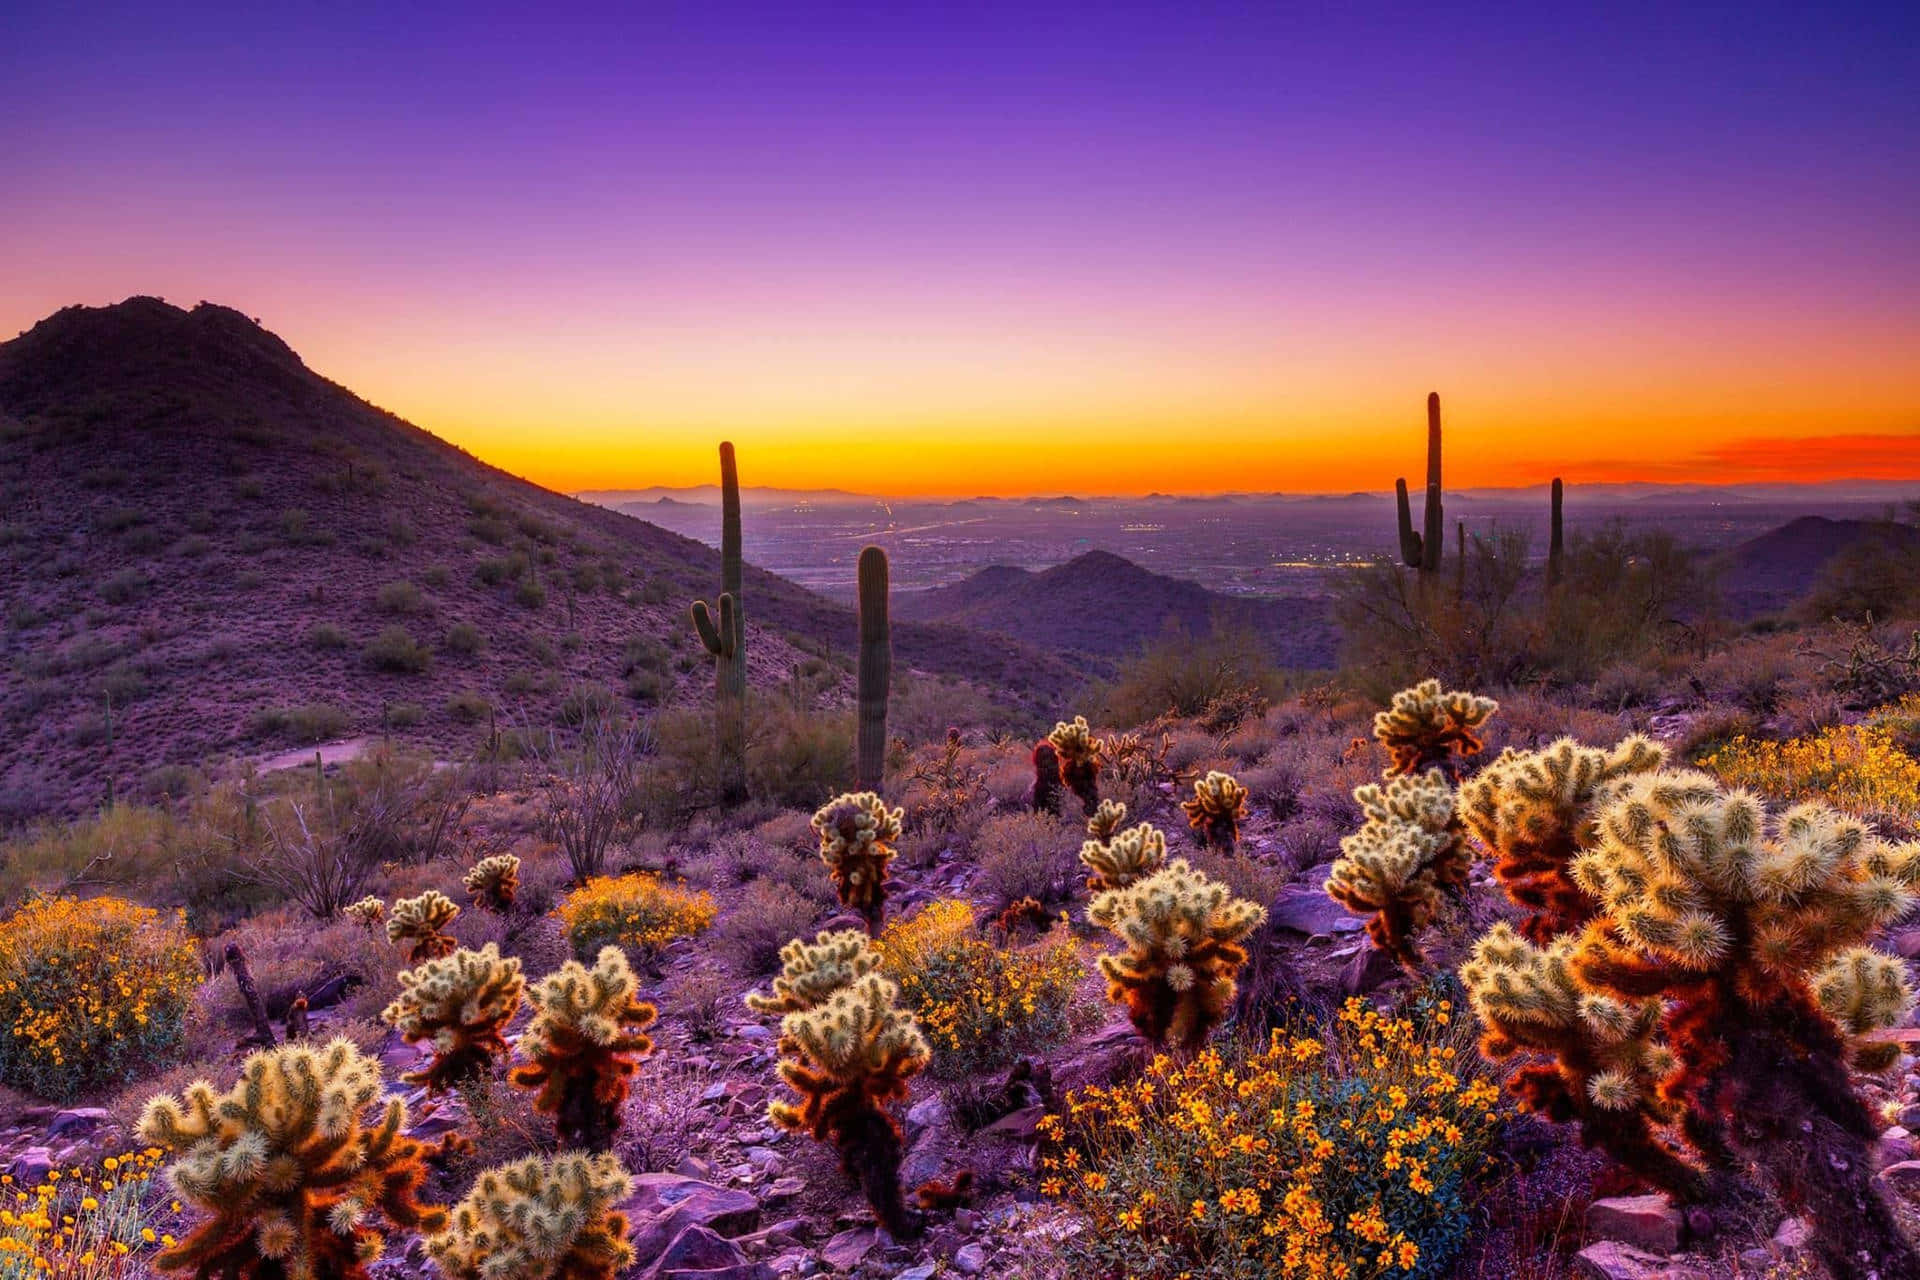 A Sunset Over A Desert With Cactus And Flowers